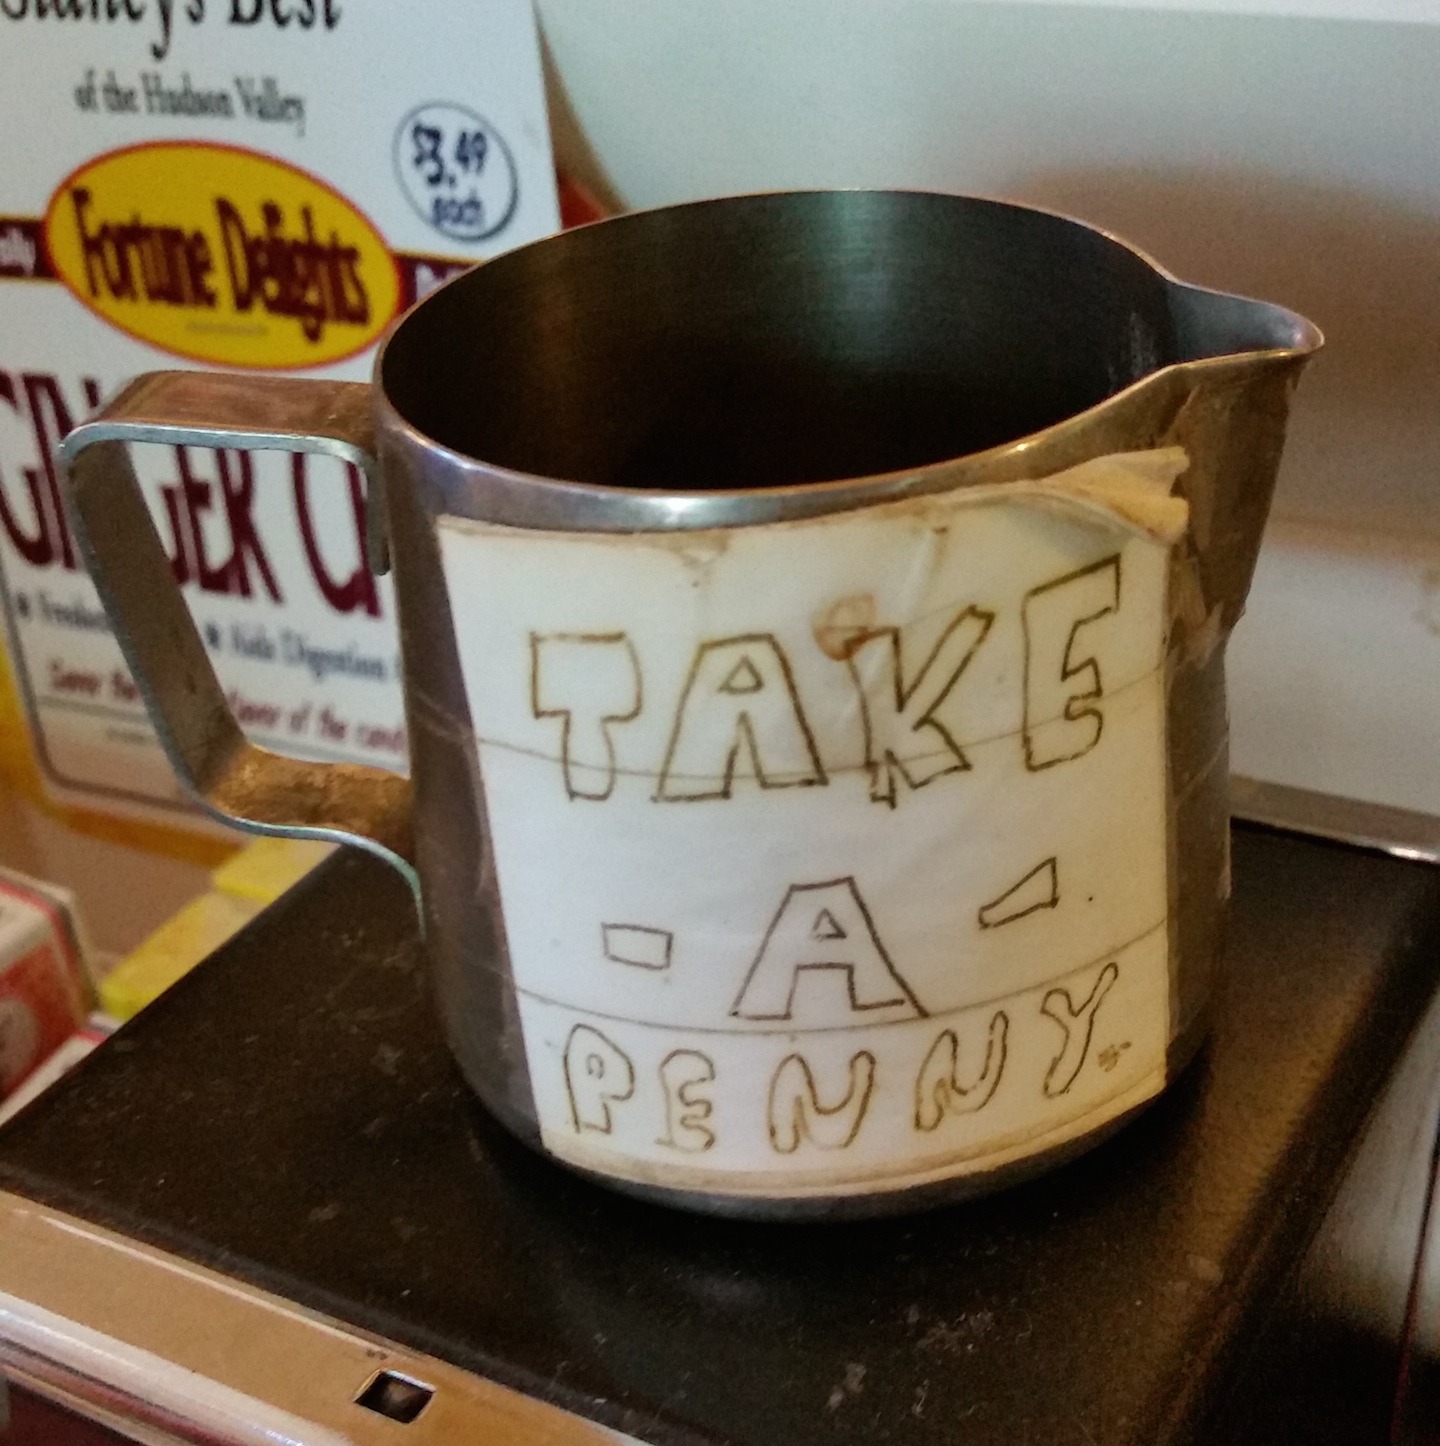 Found at The Bakery, love the handlettering and creative use of the creamer.